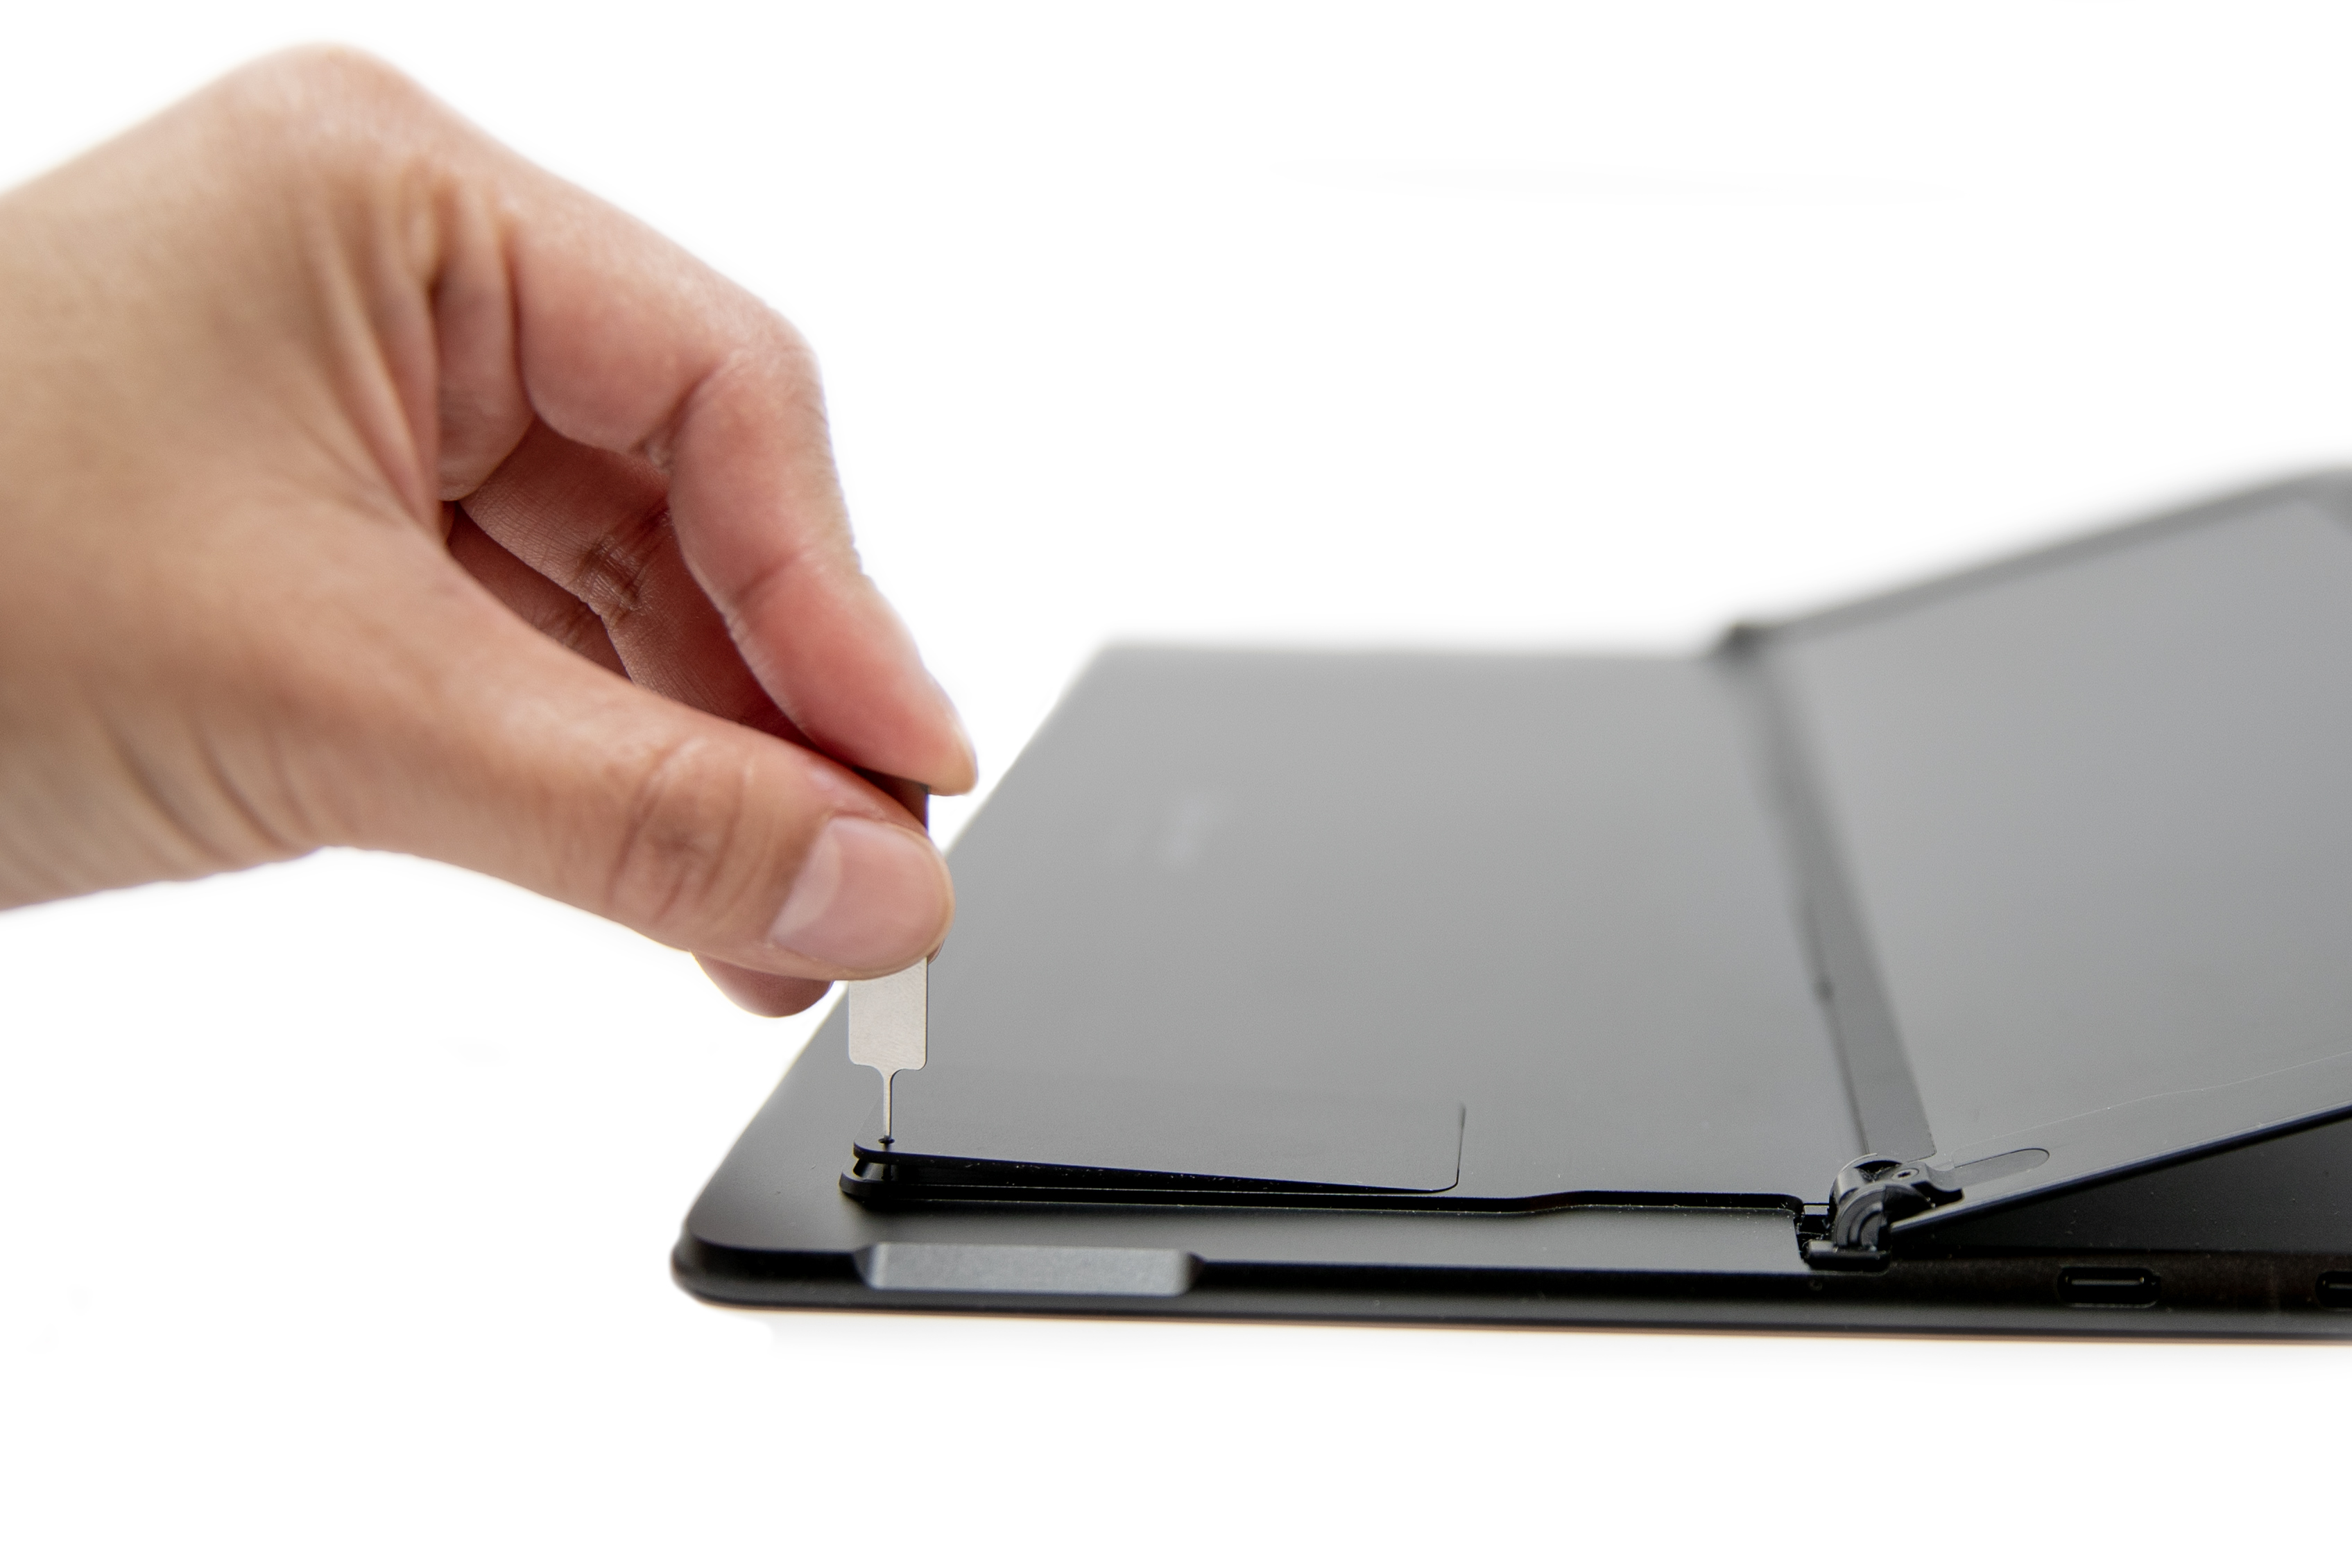 A person's hand inserted a SIM ejector into a Surface Pro X.